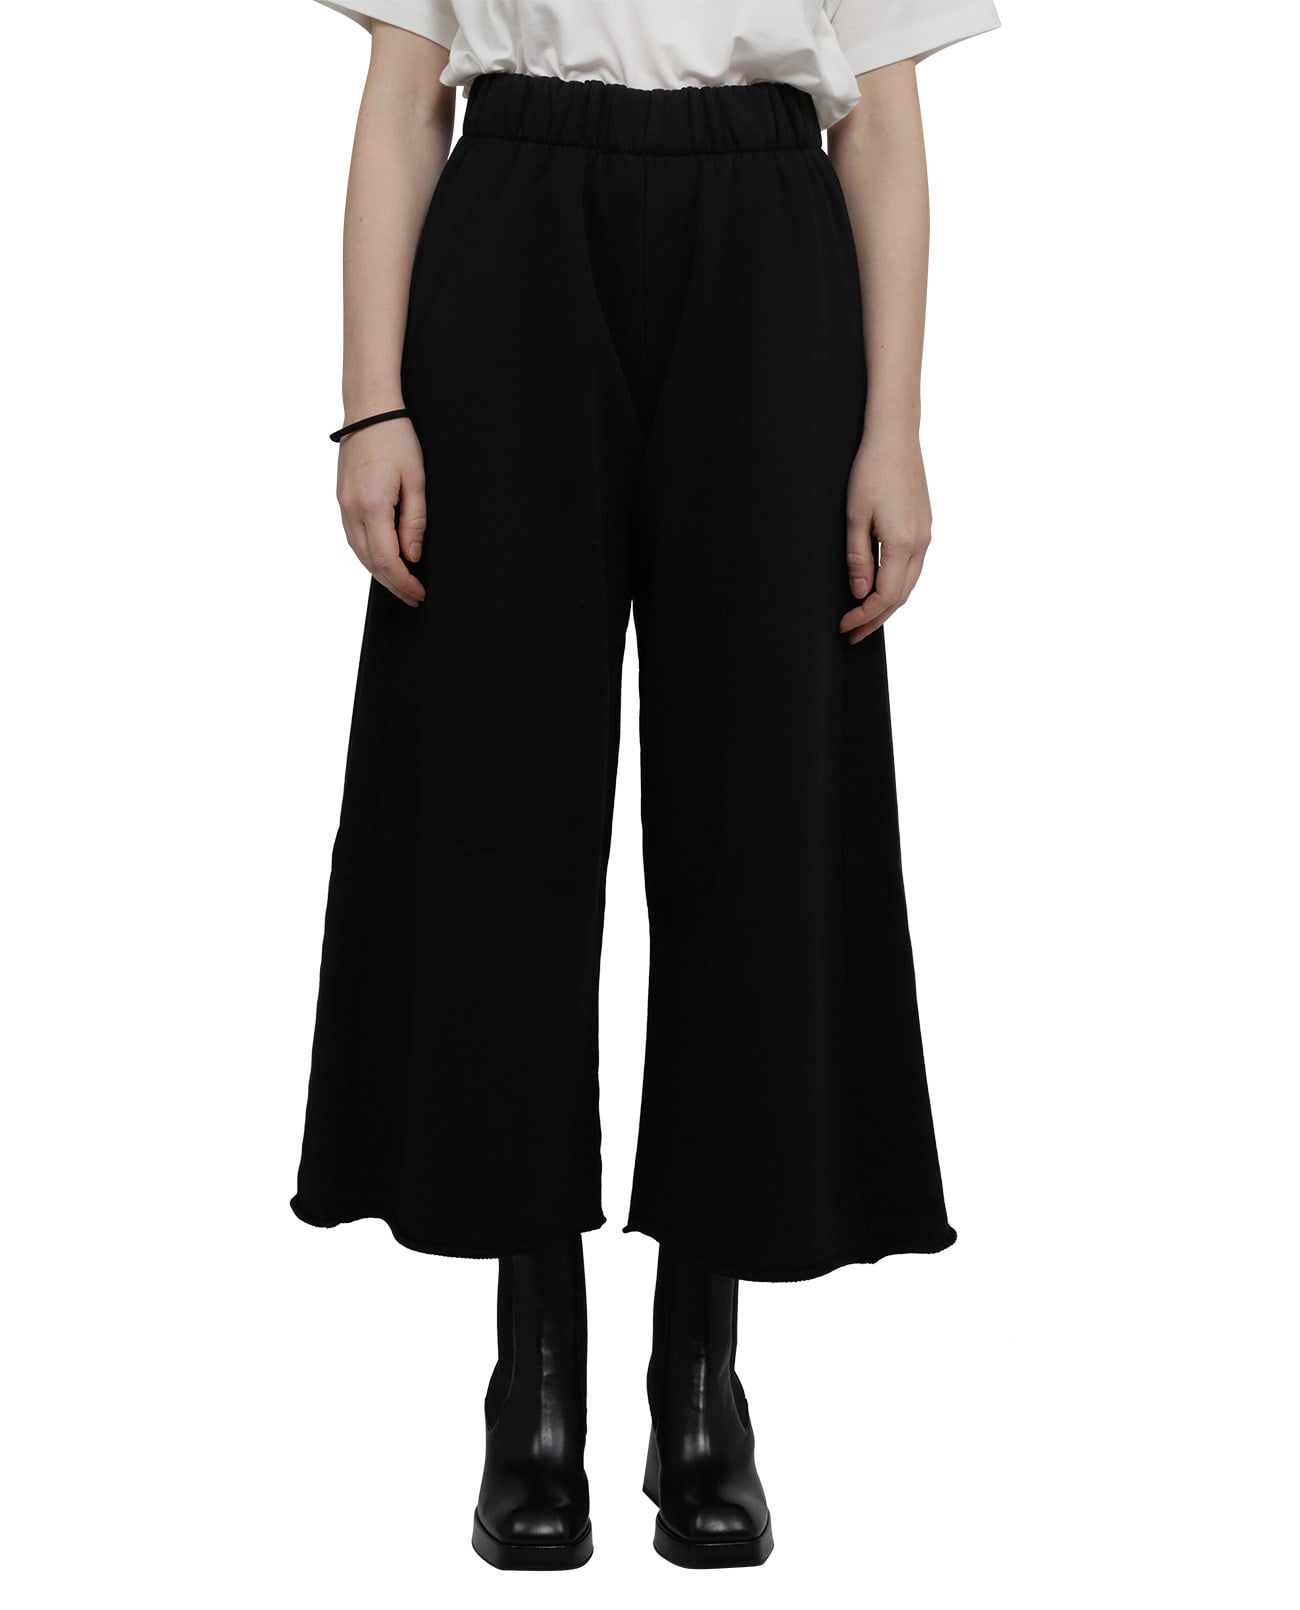 Liberal Youth Ministry Black Sweatpants